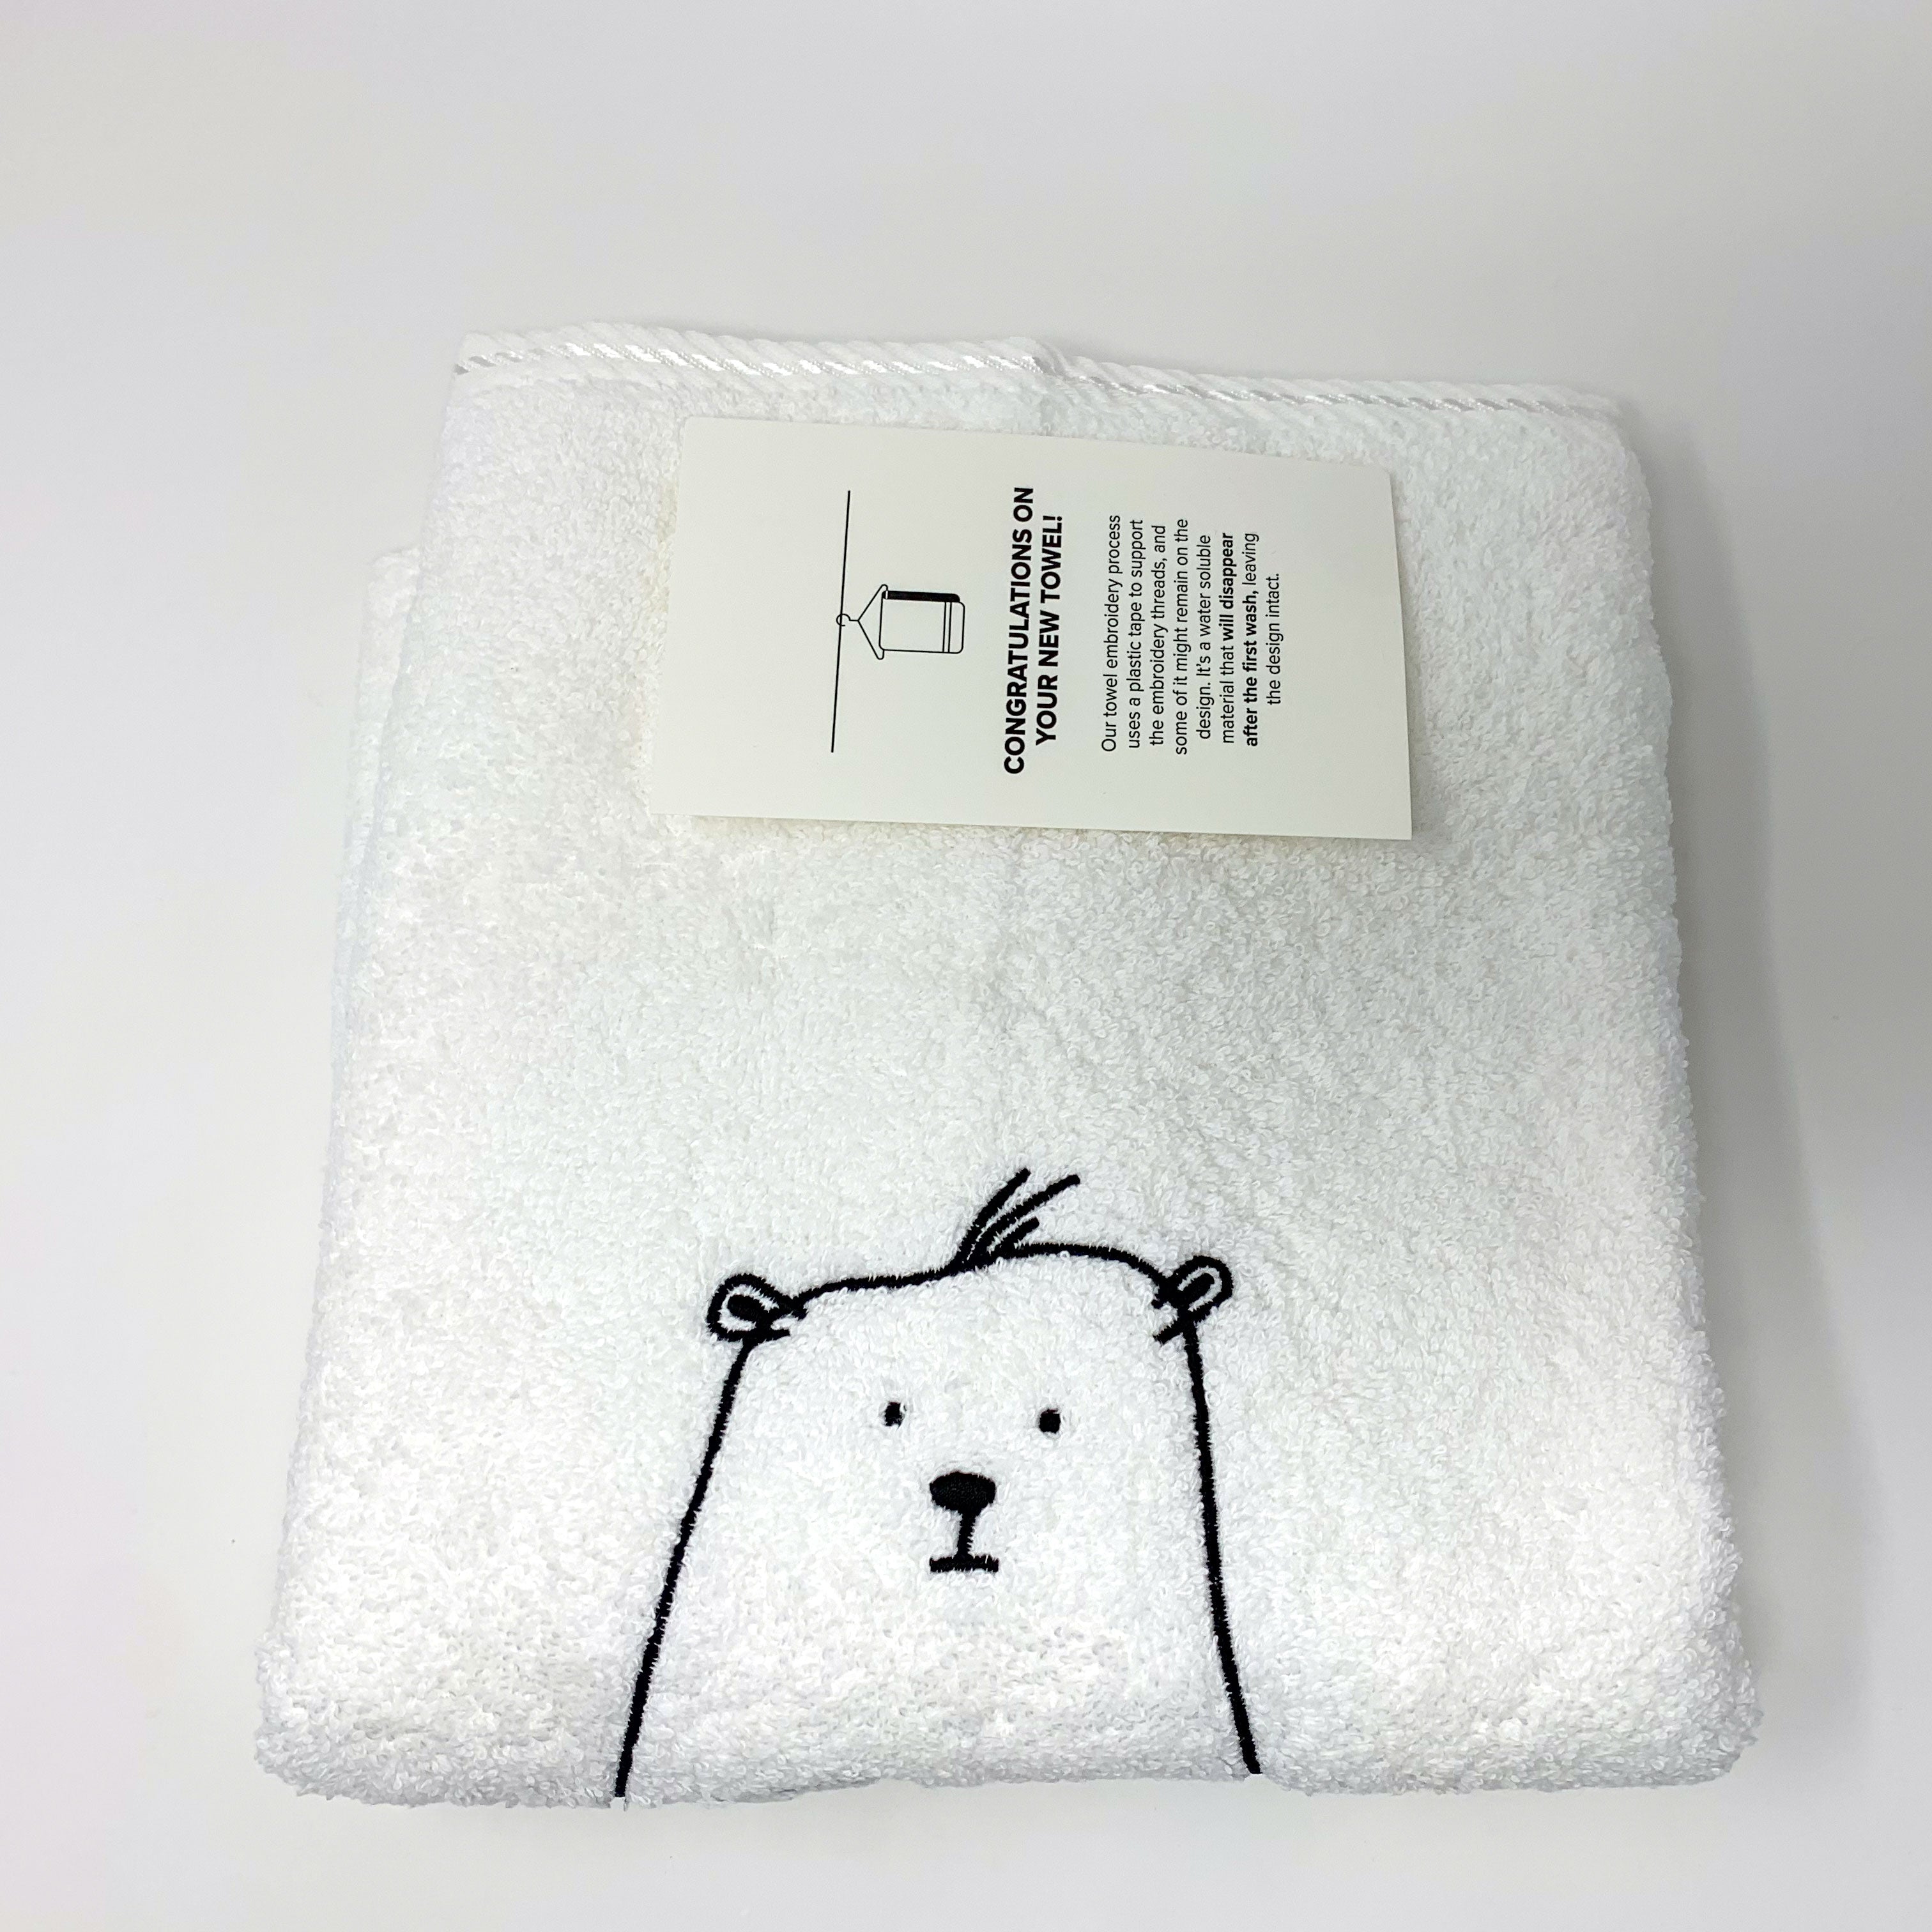 Cute bear Turkish cotton towel cute gift idea eco-friendly bath, hand towels white, creme grey black gift idea for families with kids-1